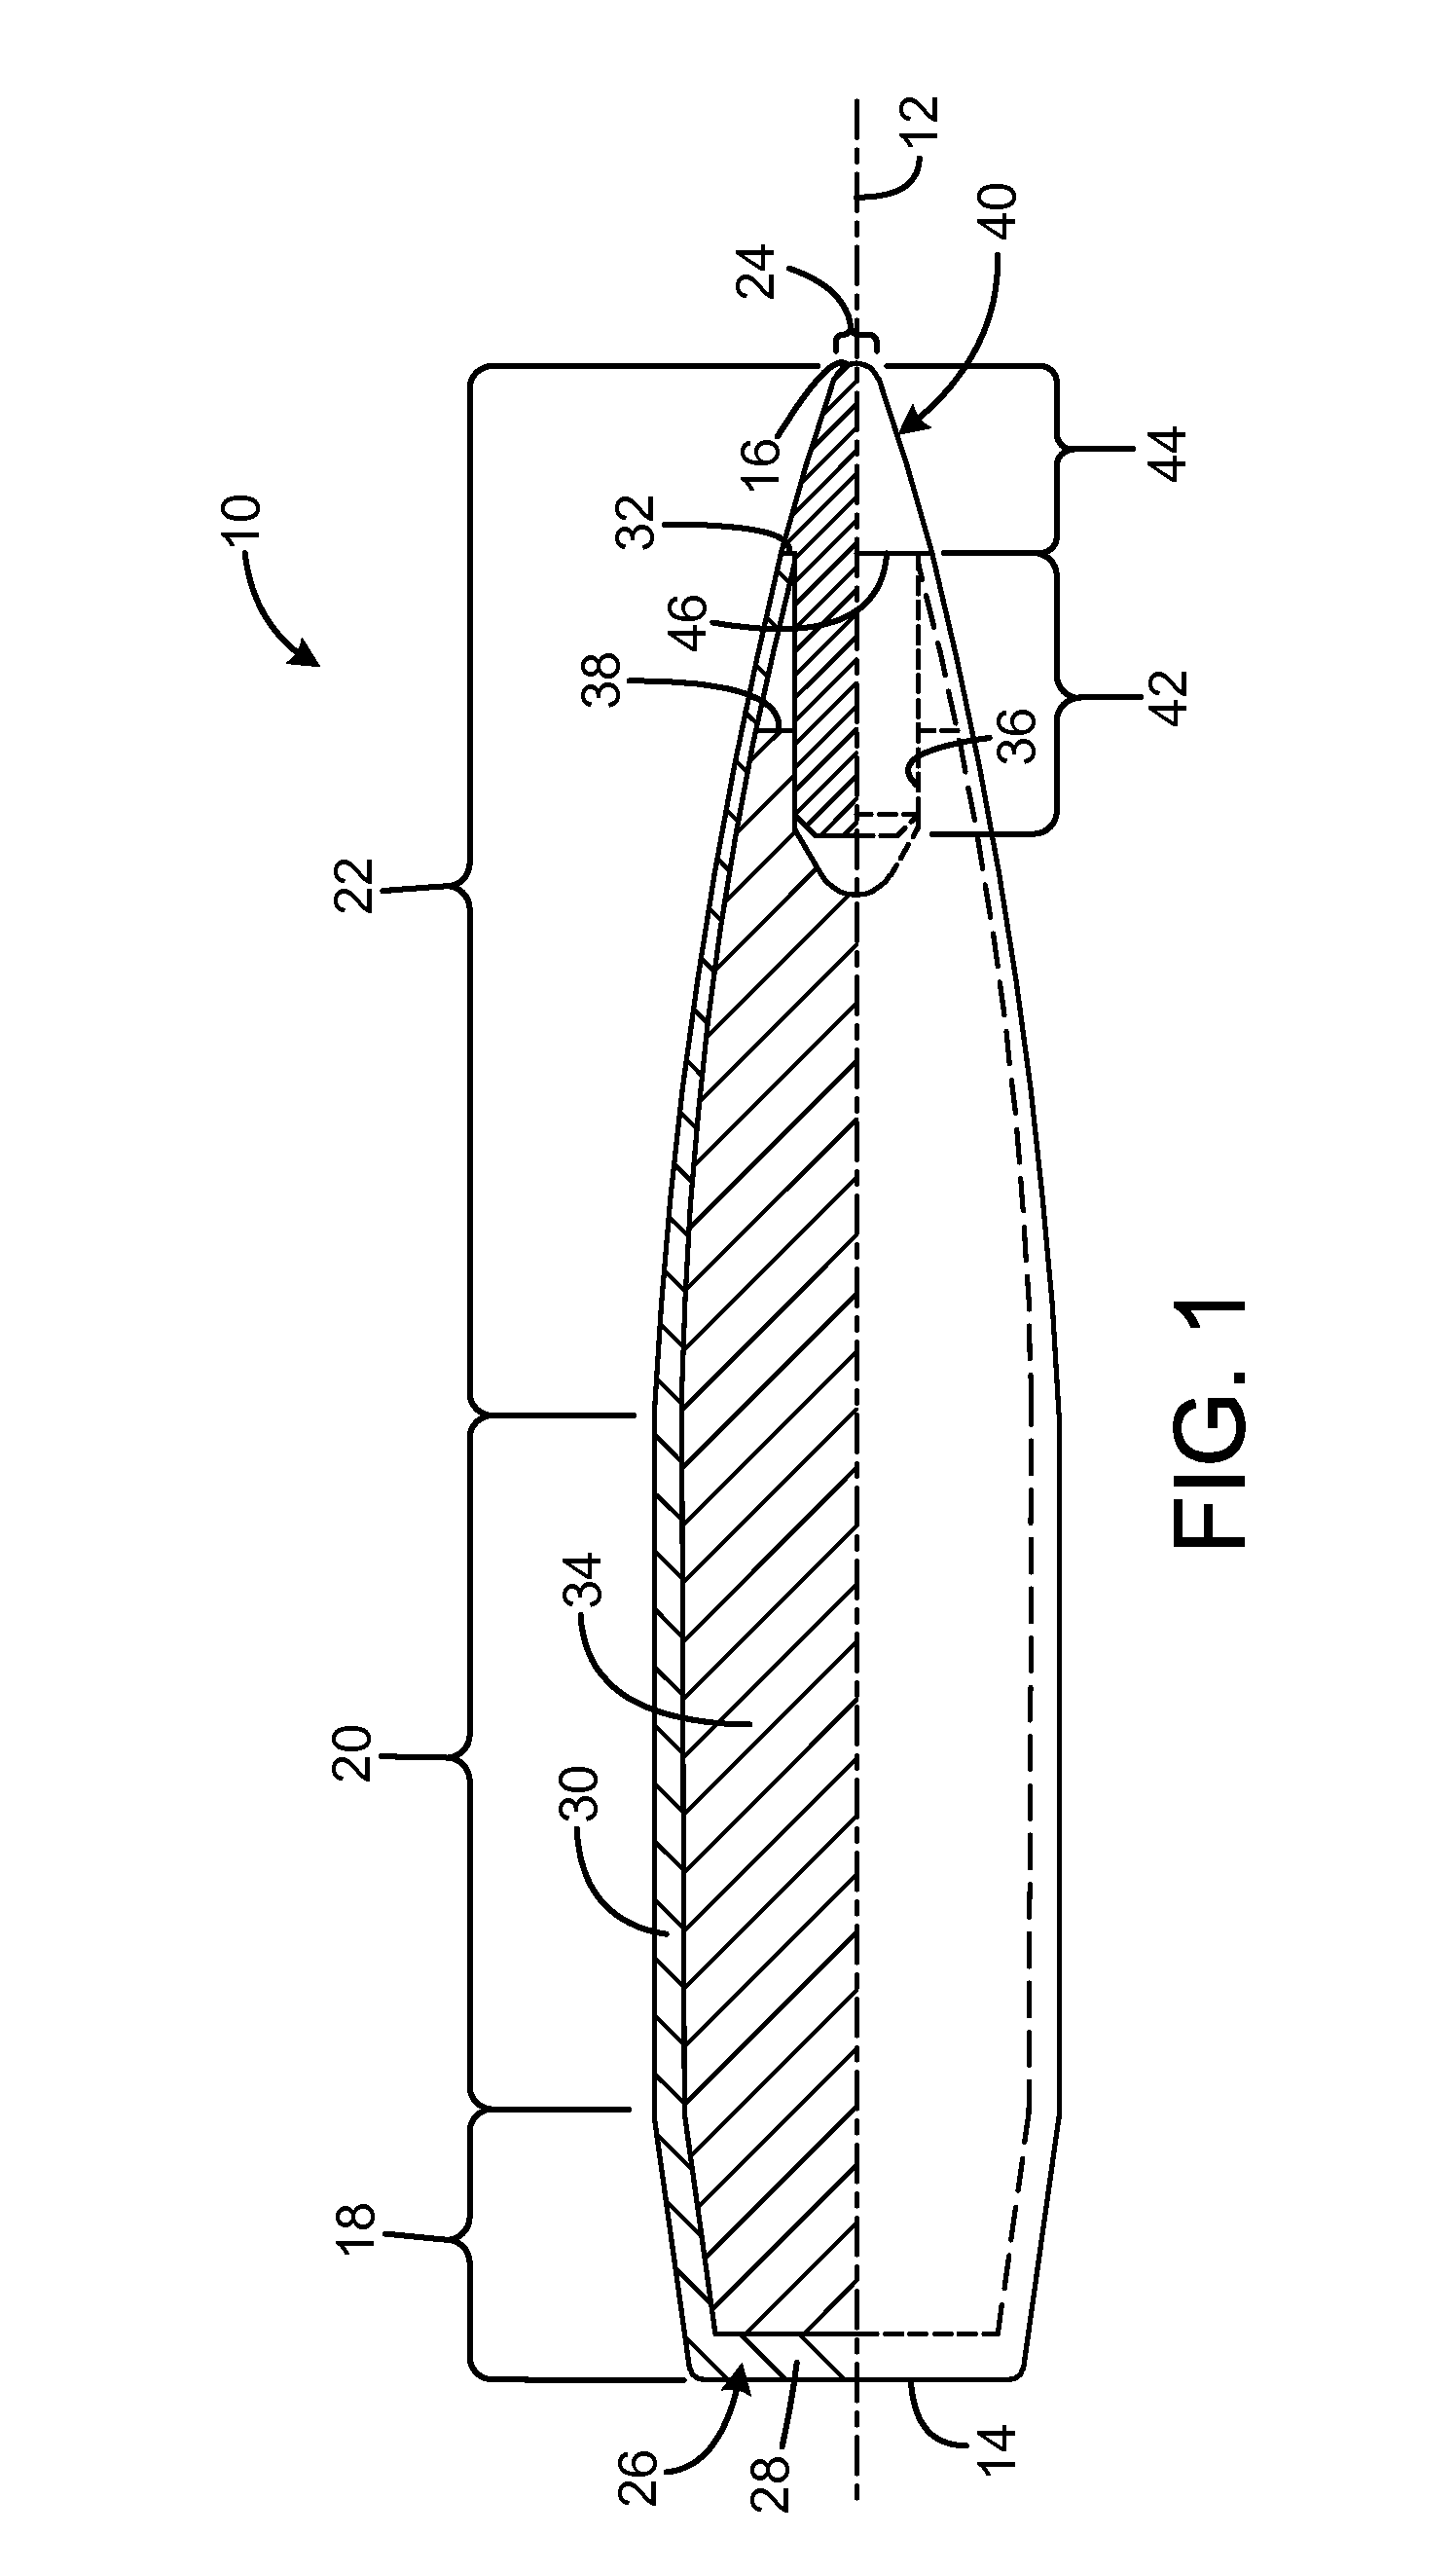 Projectile with amorphous polymer tip